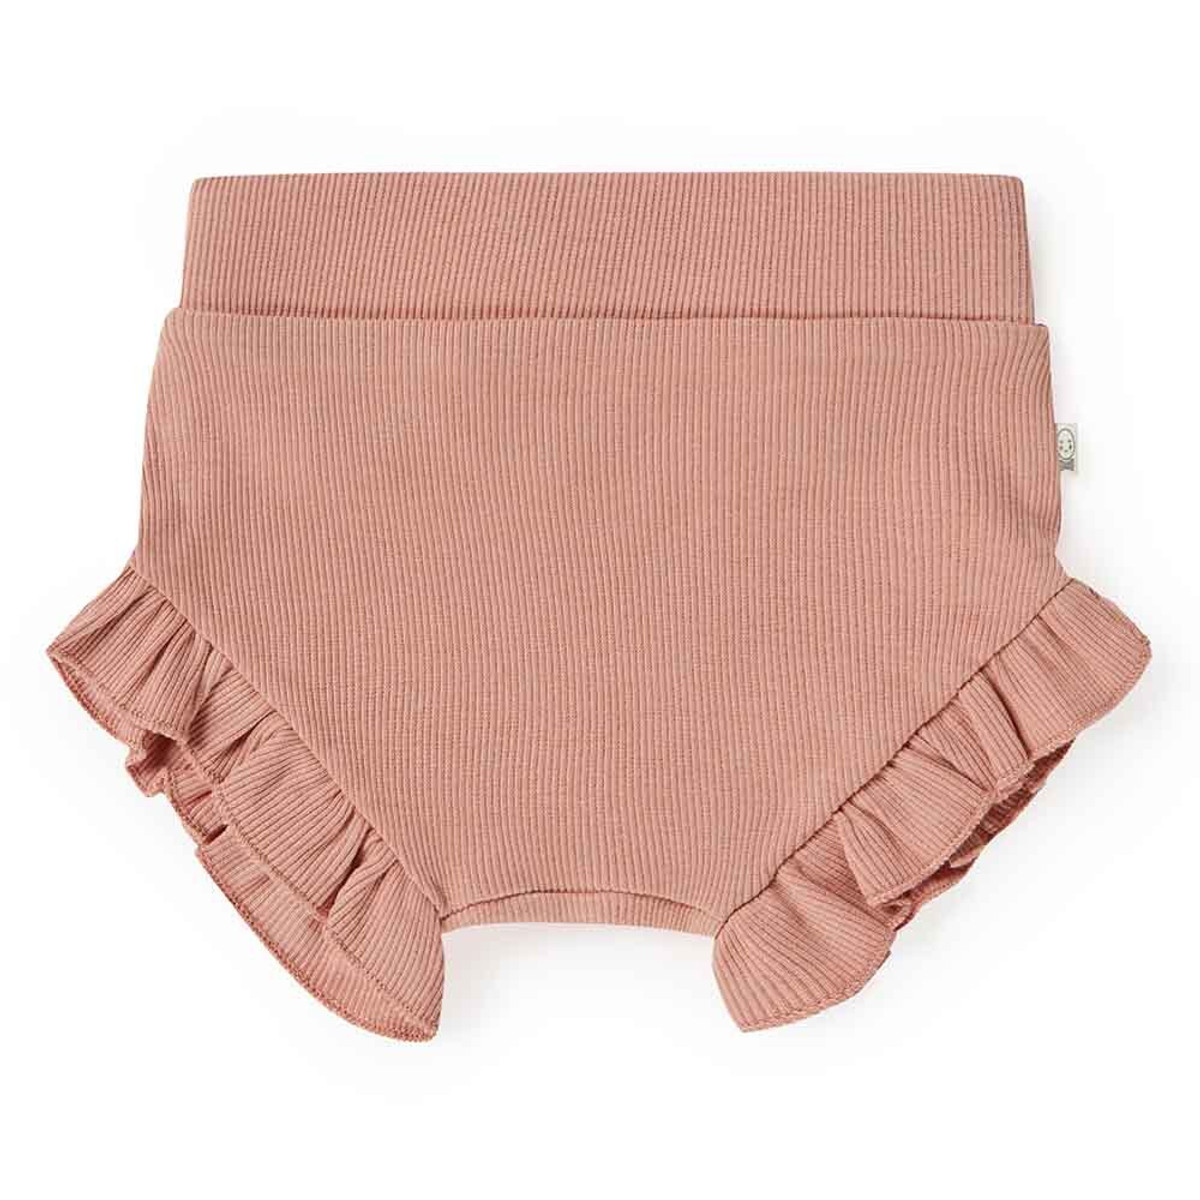 SNUGGLE HUNNY KIDS - ROSE BLOOMERS